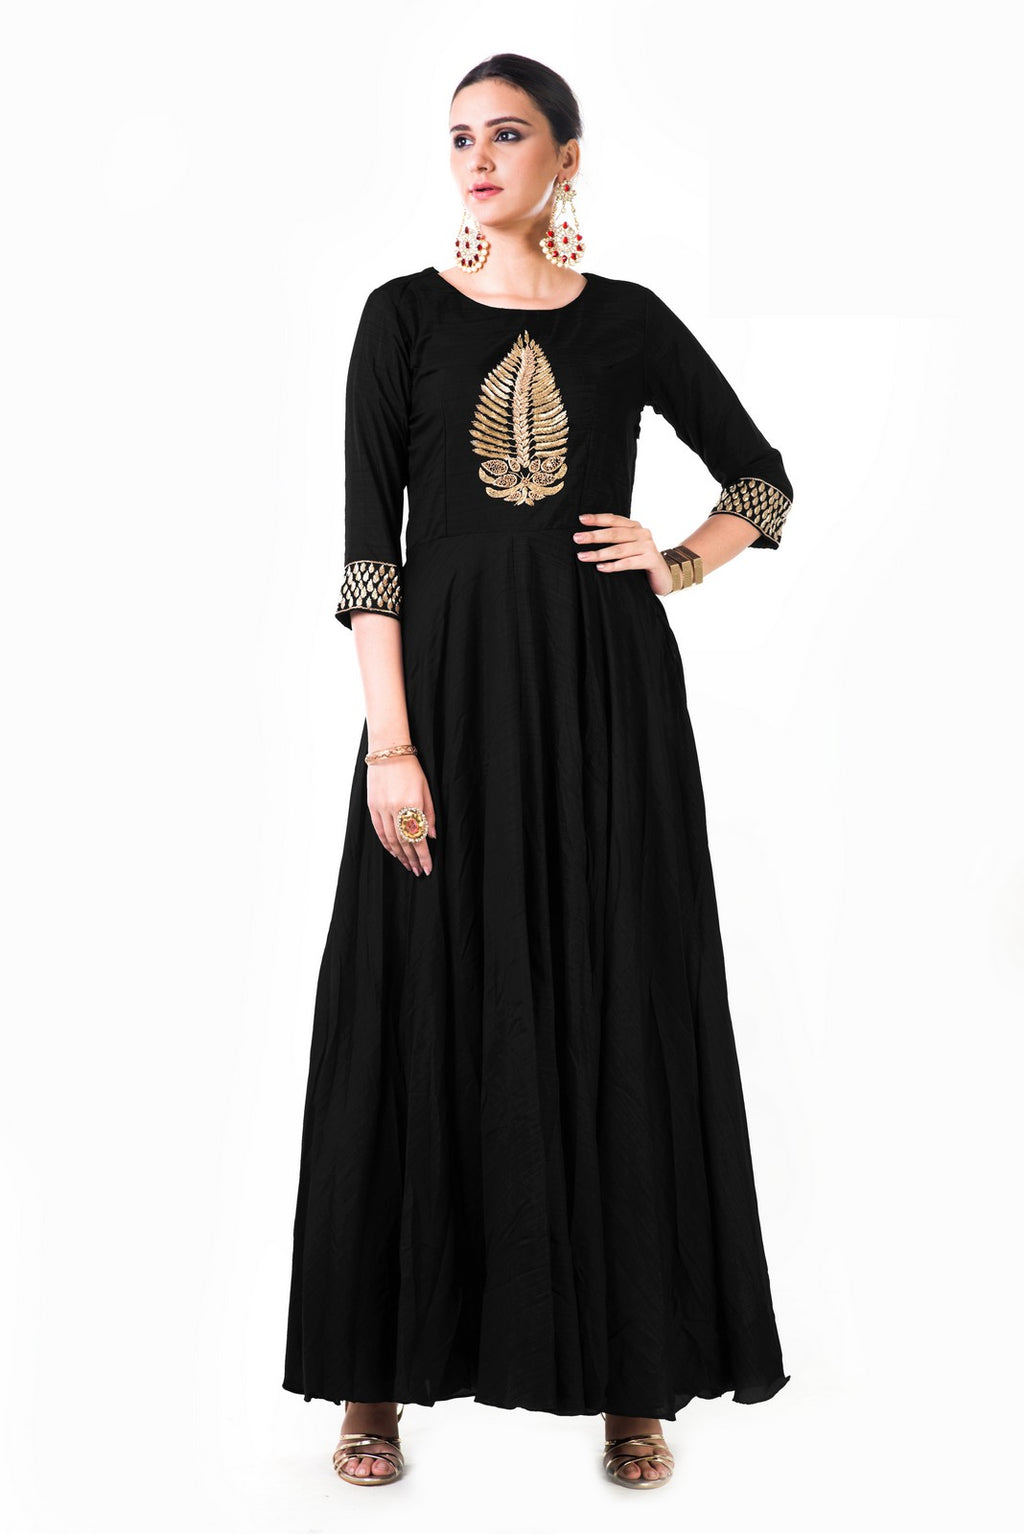 Black Leaf Hand Embroidered Silk Anarkali Gown – Saris and Things